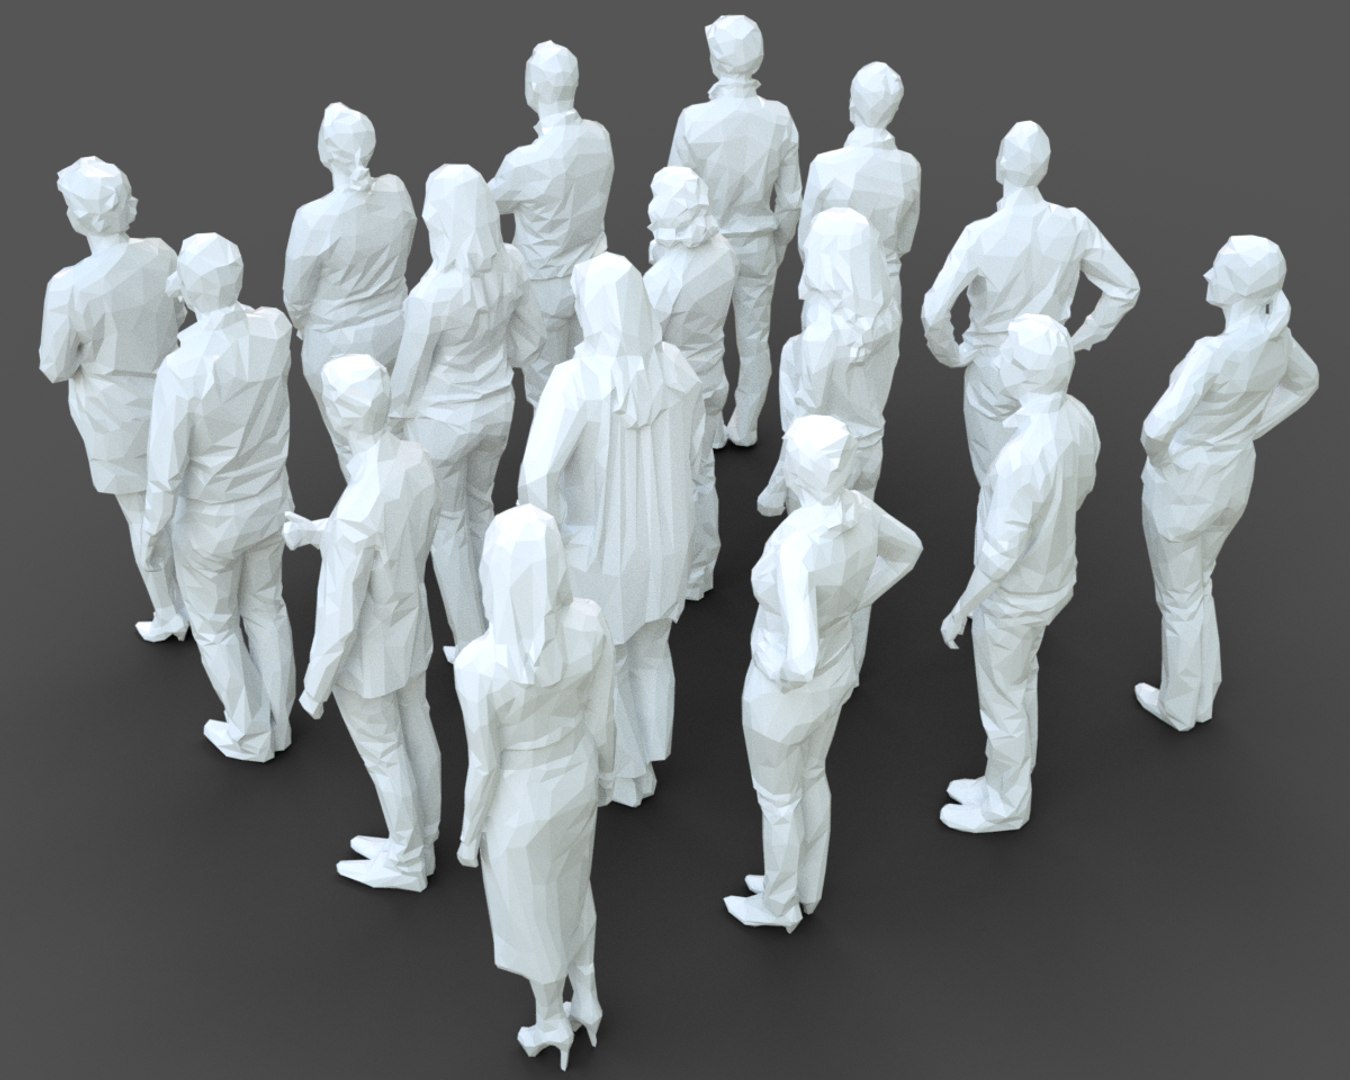 Architectural Stylized Human Character 3D Model | 1147646 | TurboSquid